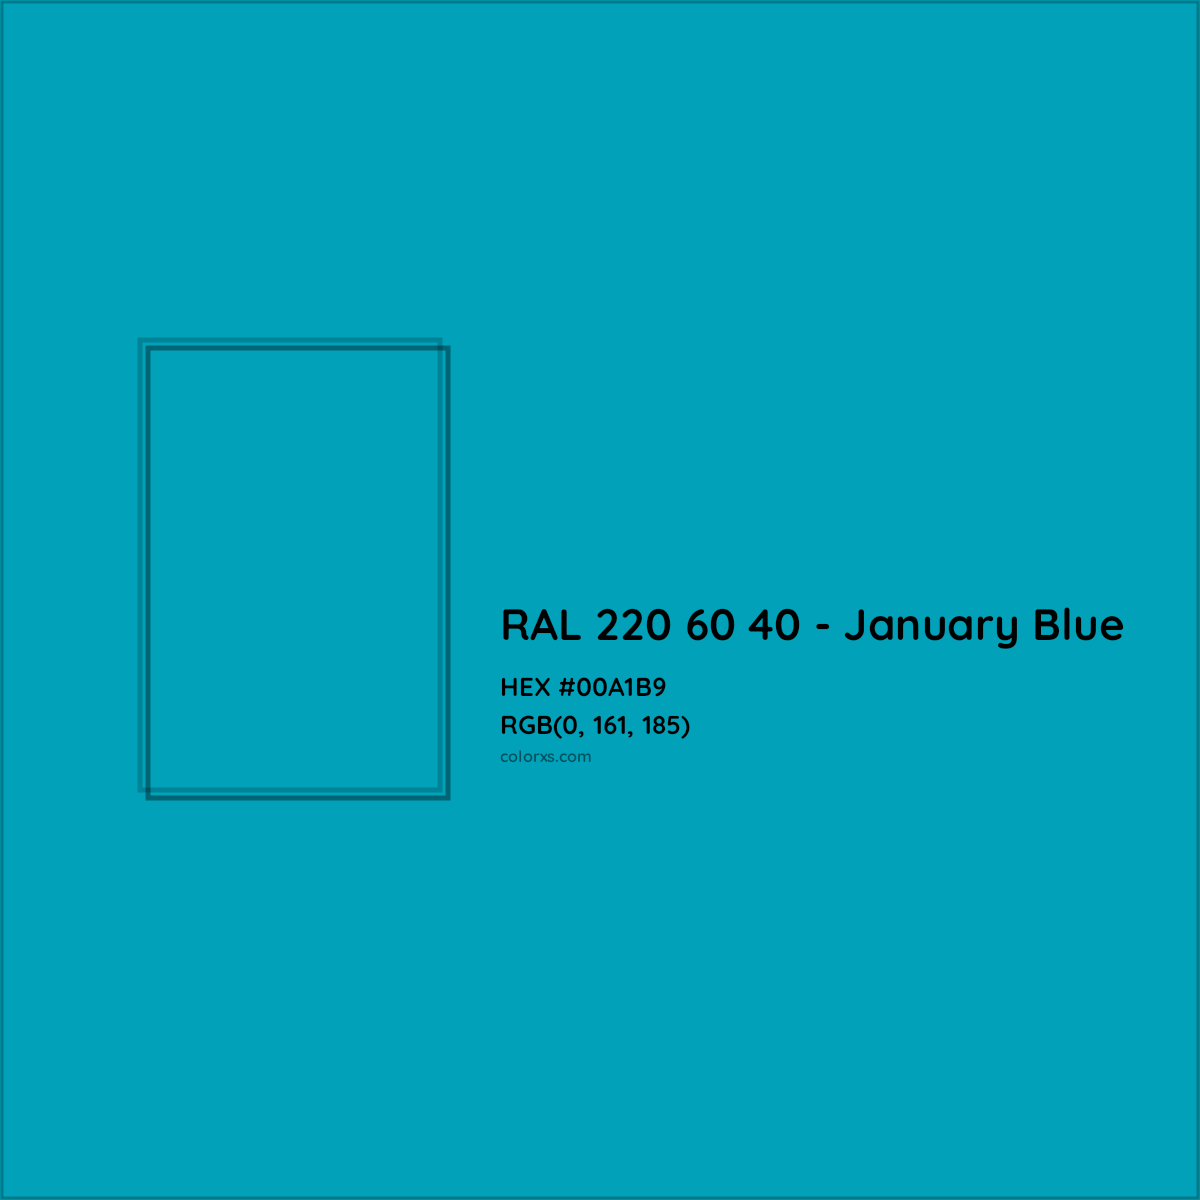 HEX #00A1B9 RAL 220 60 40 - January Blue CMS RAL Design - Color Code